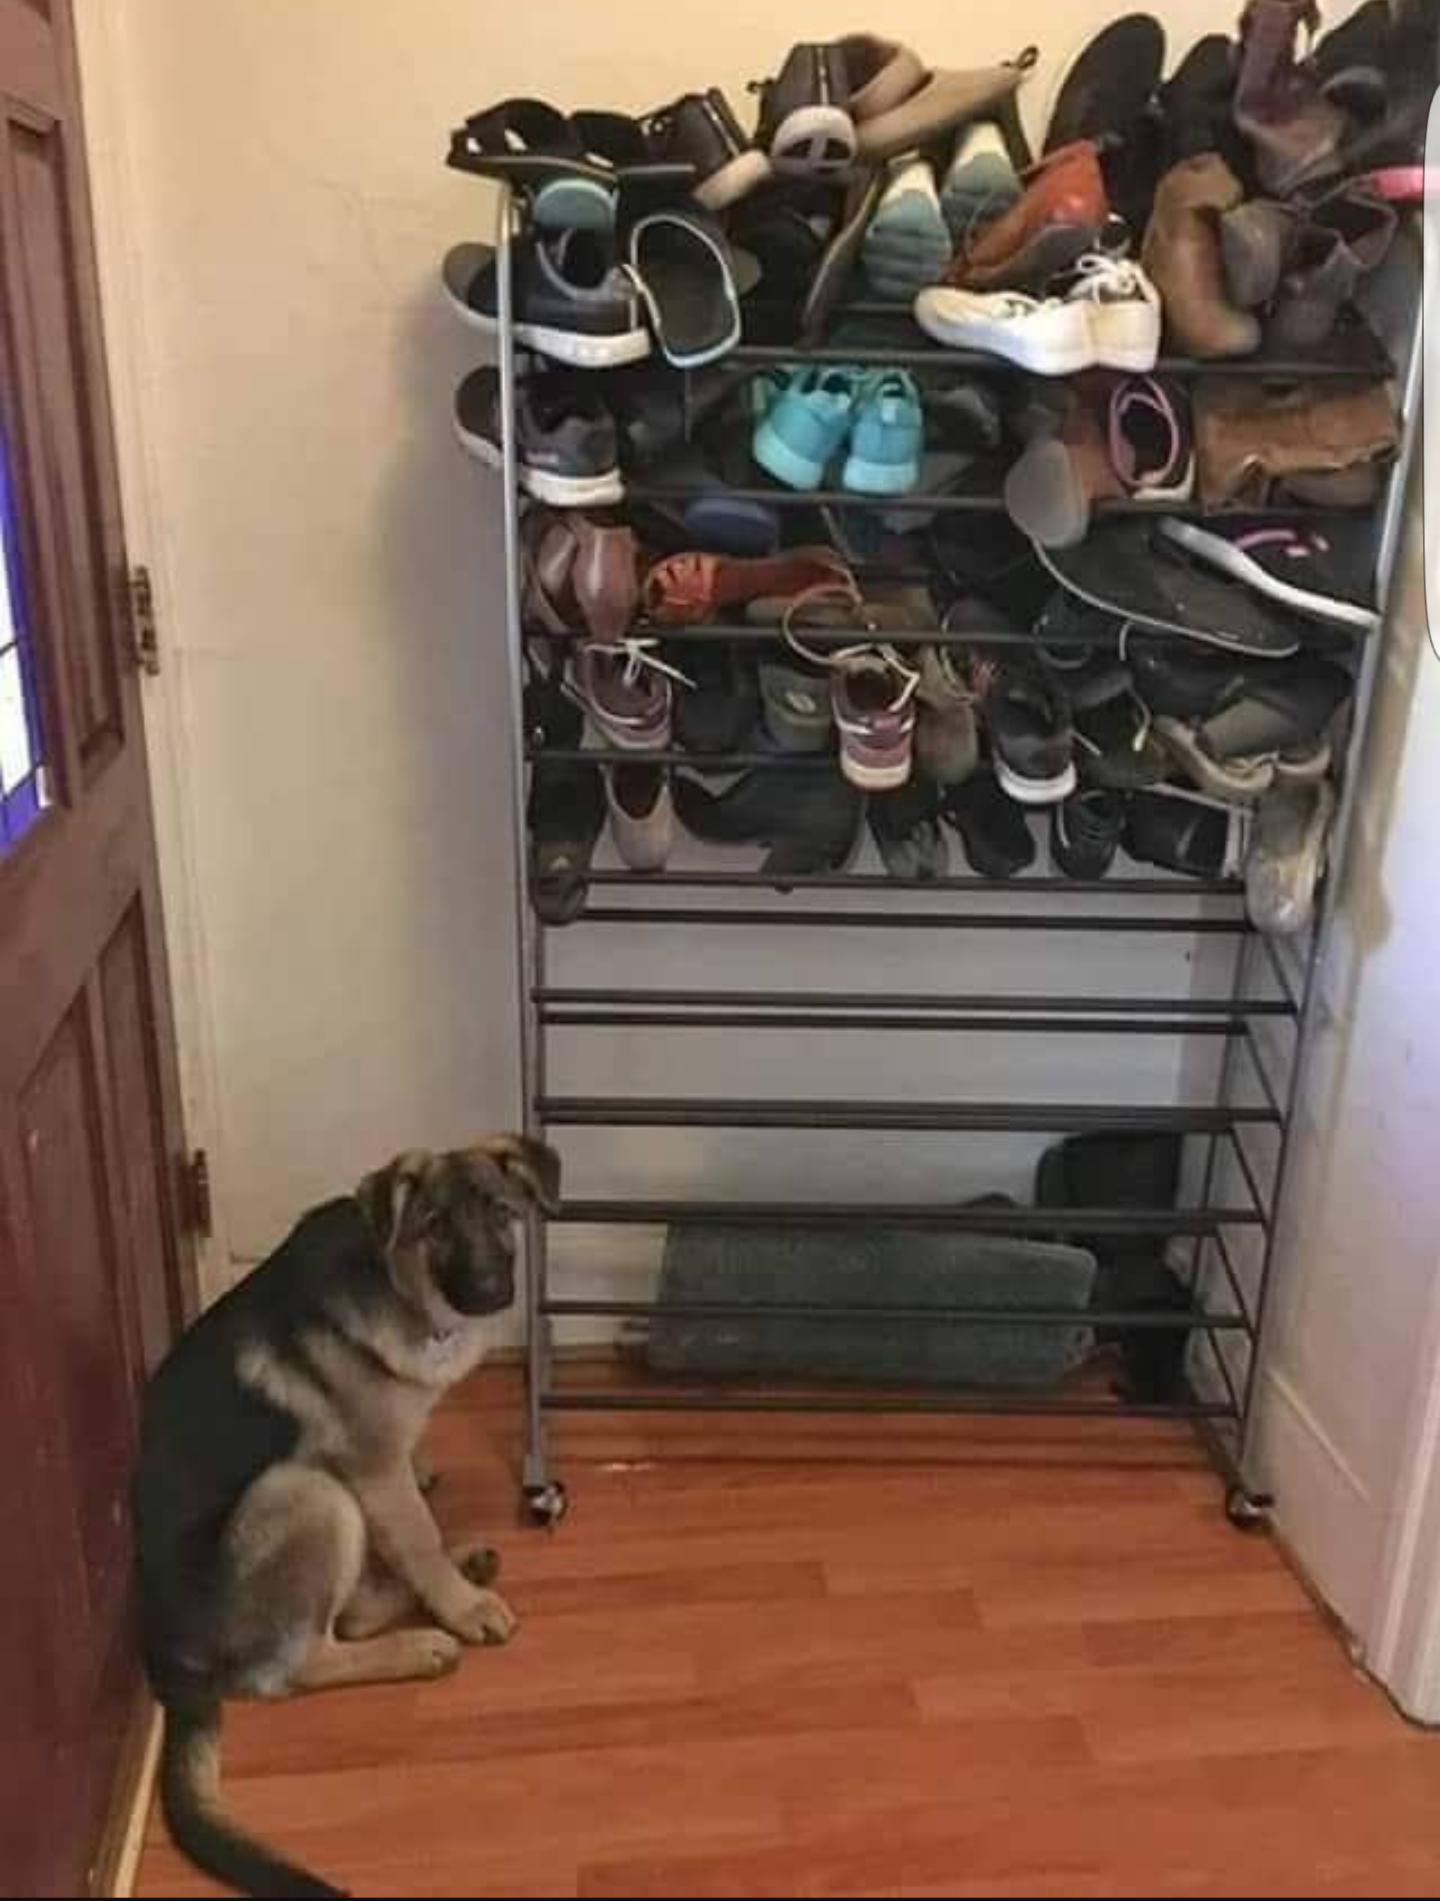 Apparently somebody likes to eat shoes.